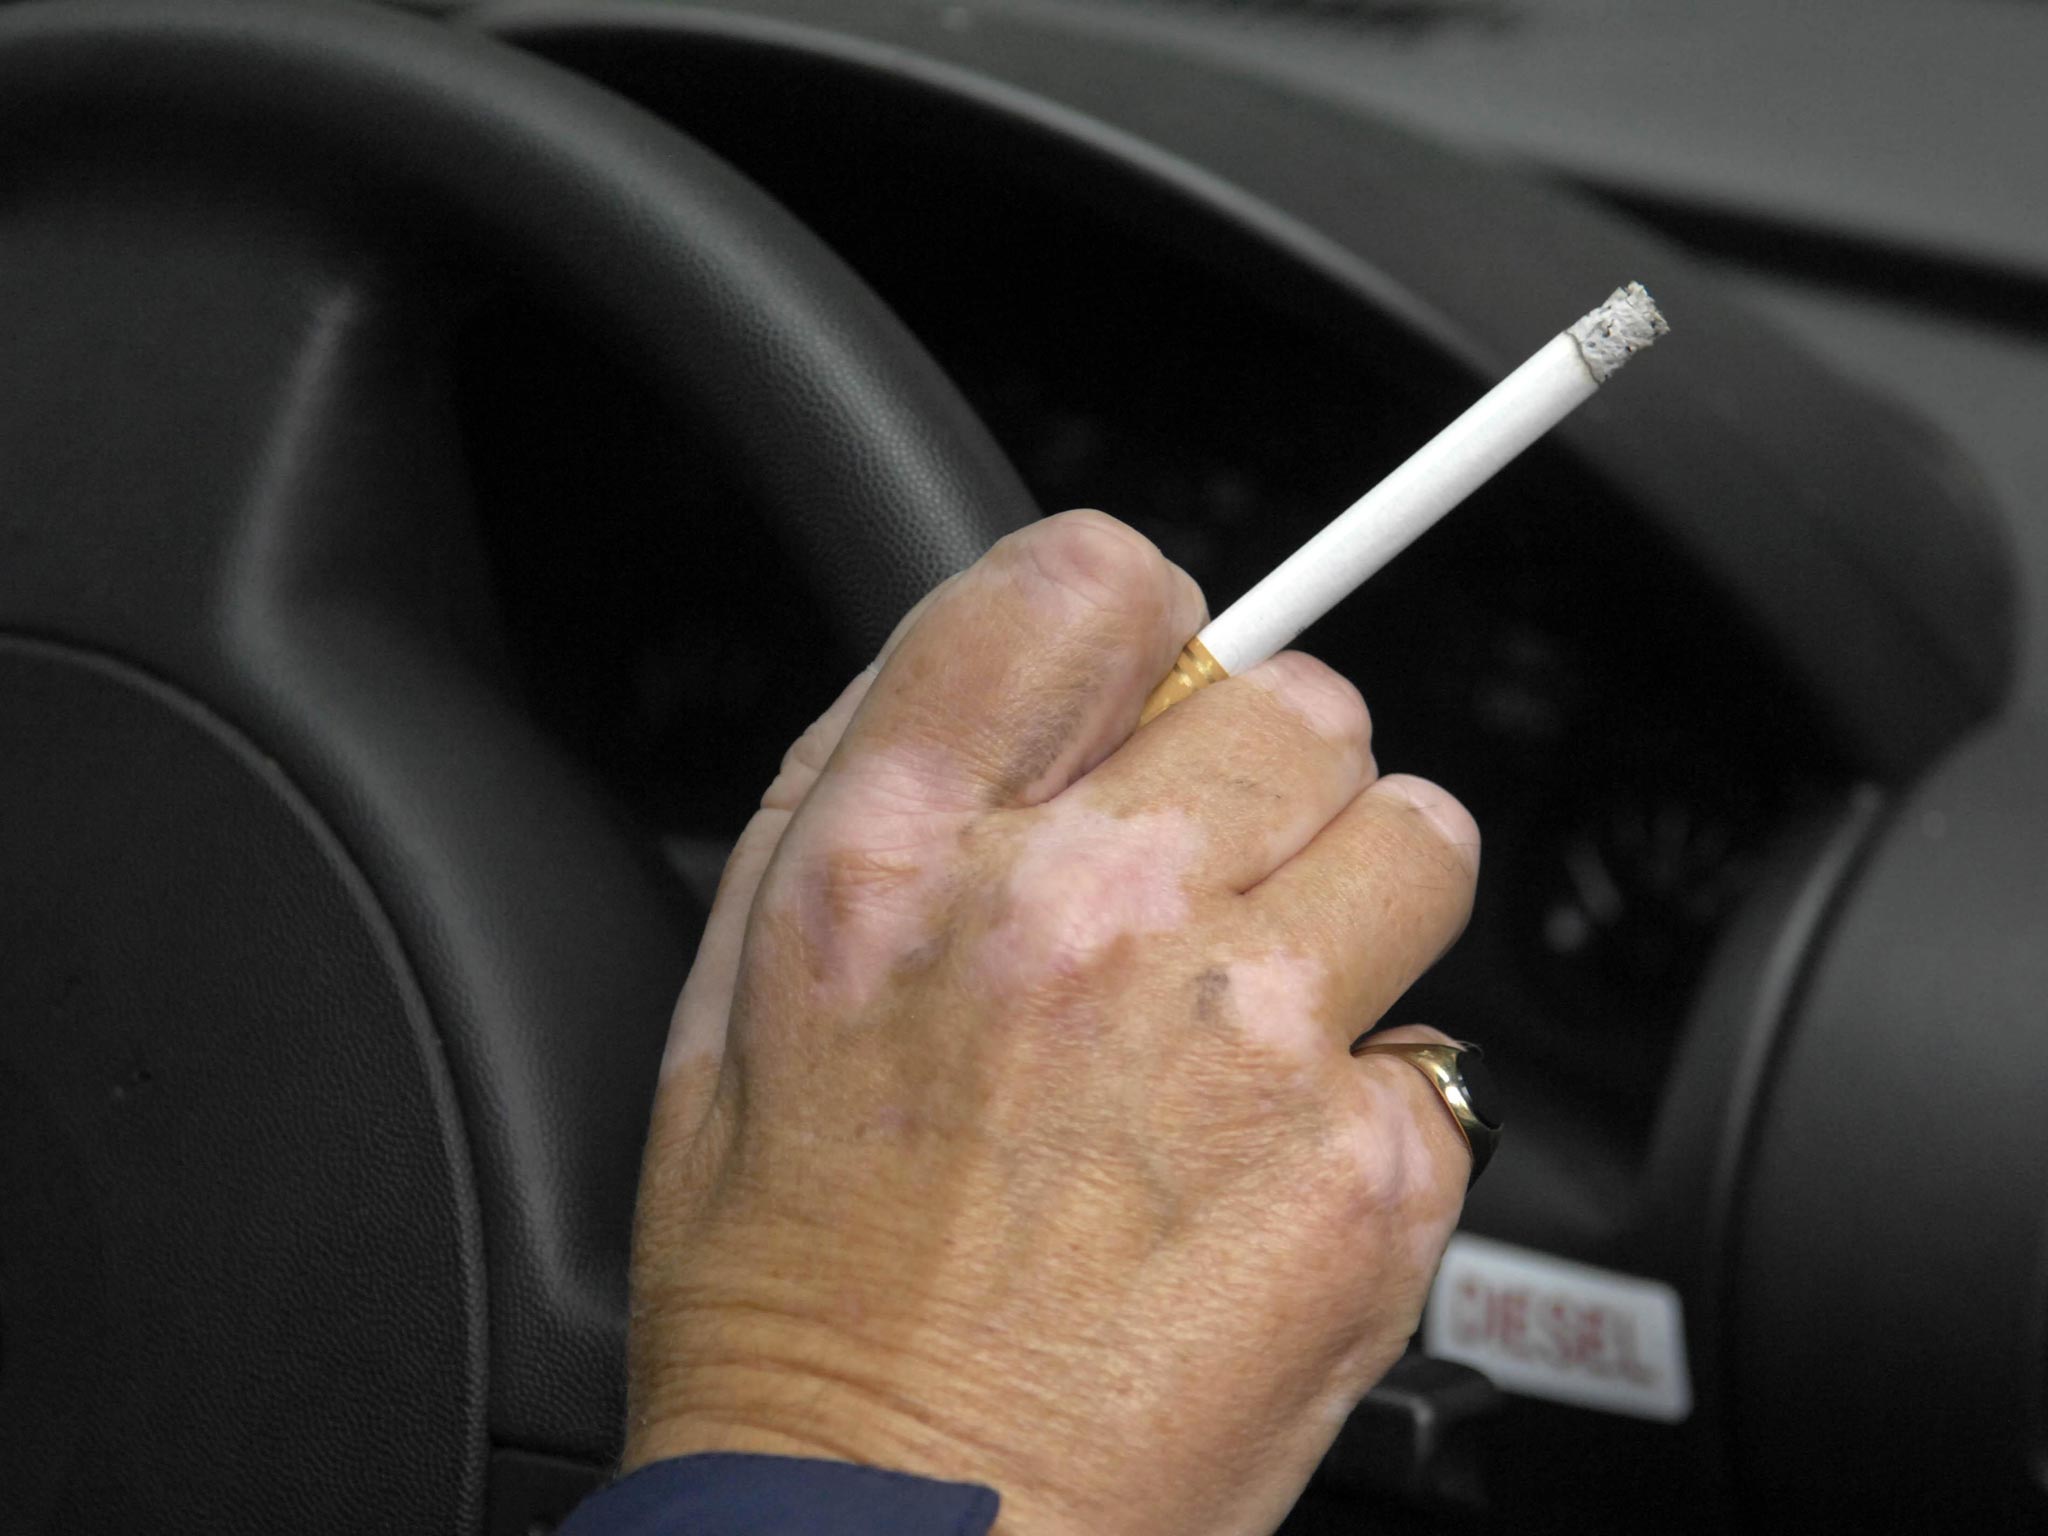 London Mayor Boris Johnson joined the campaign to ban smoking in cars carrying children